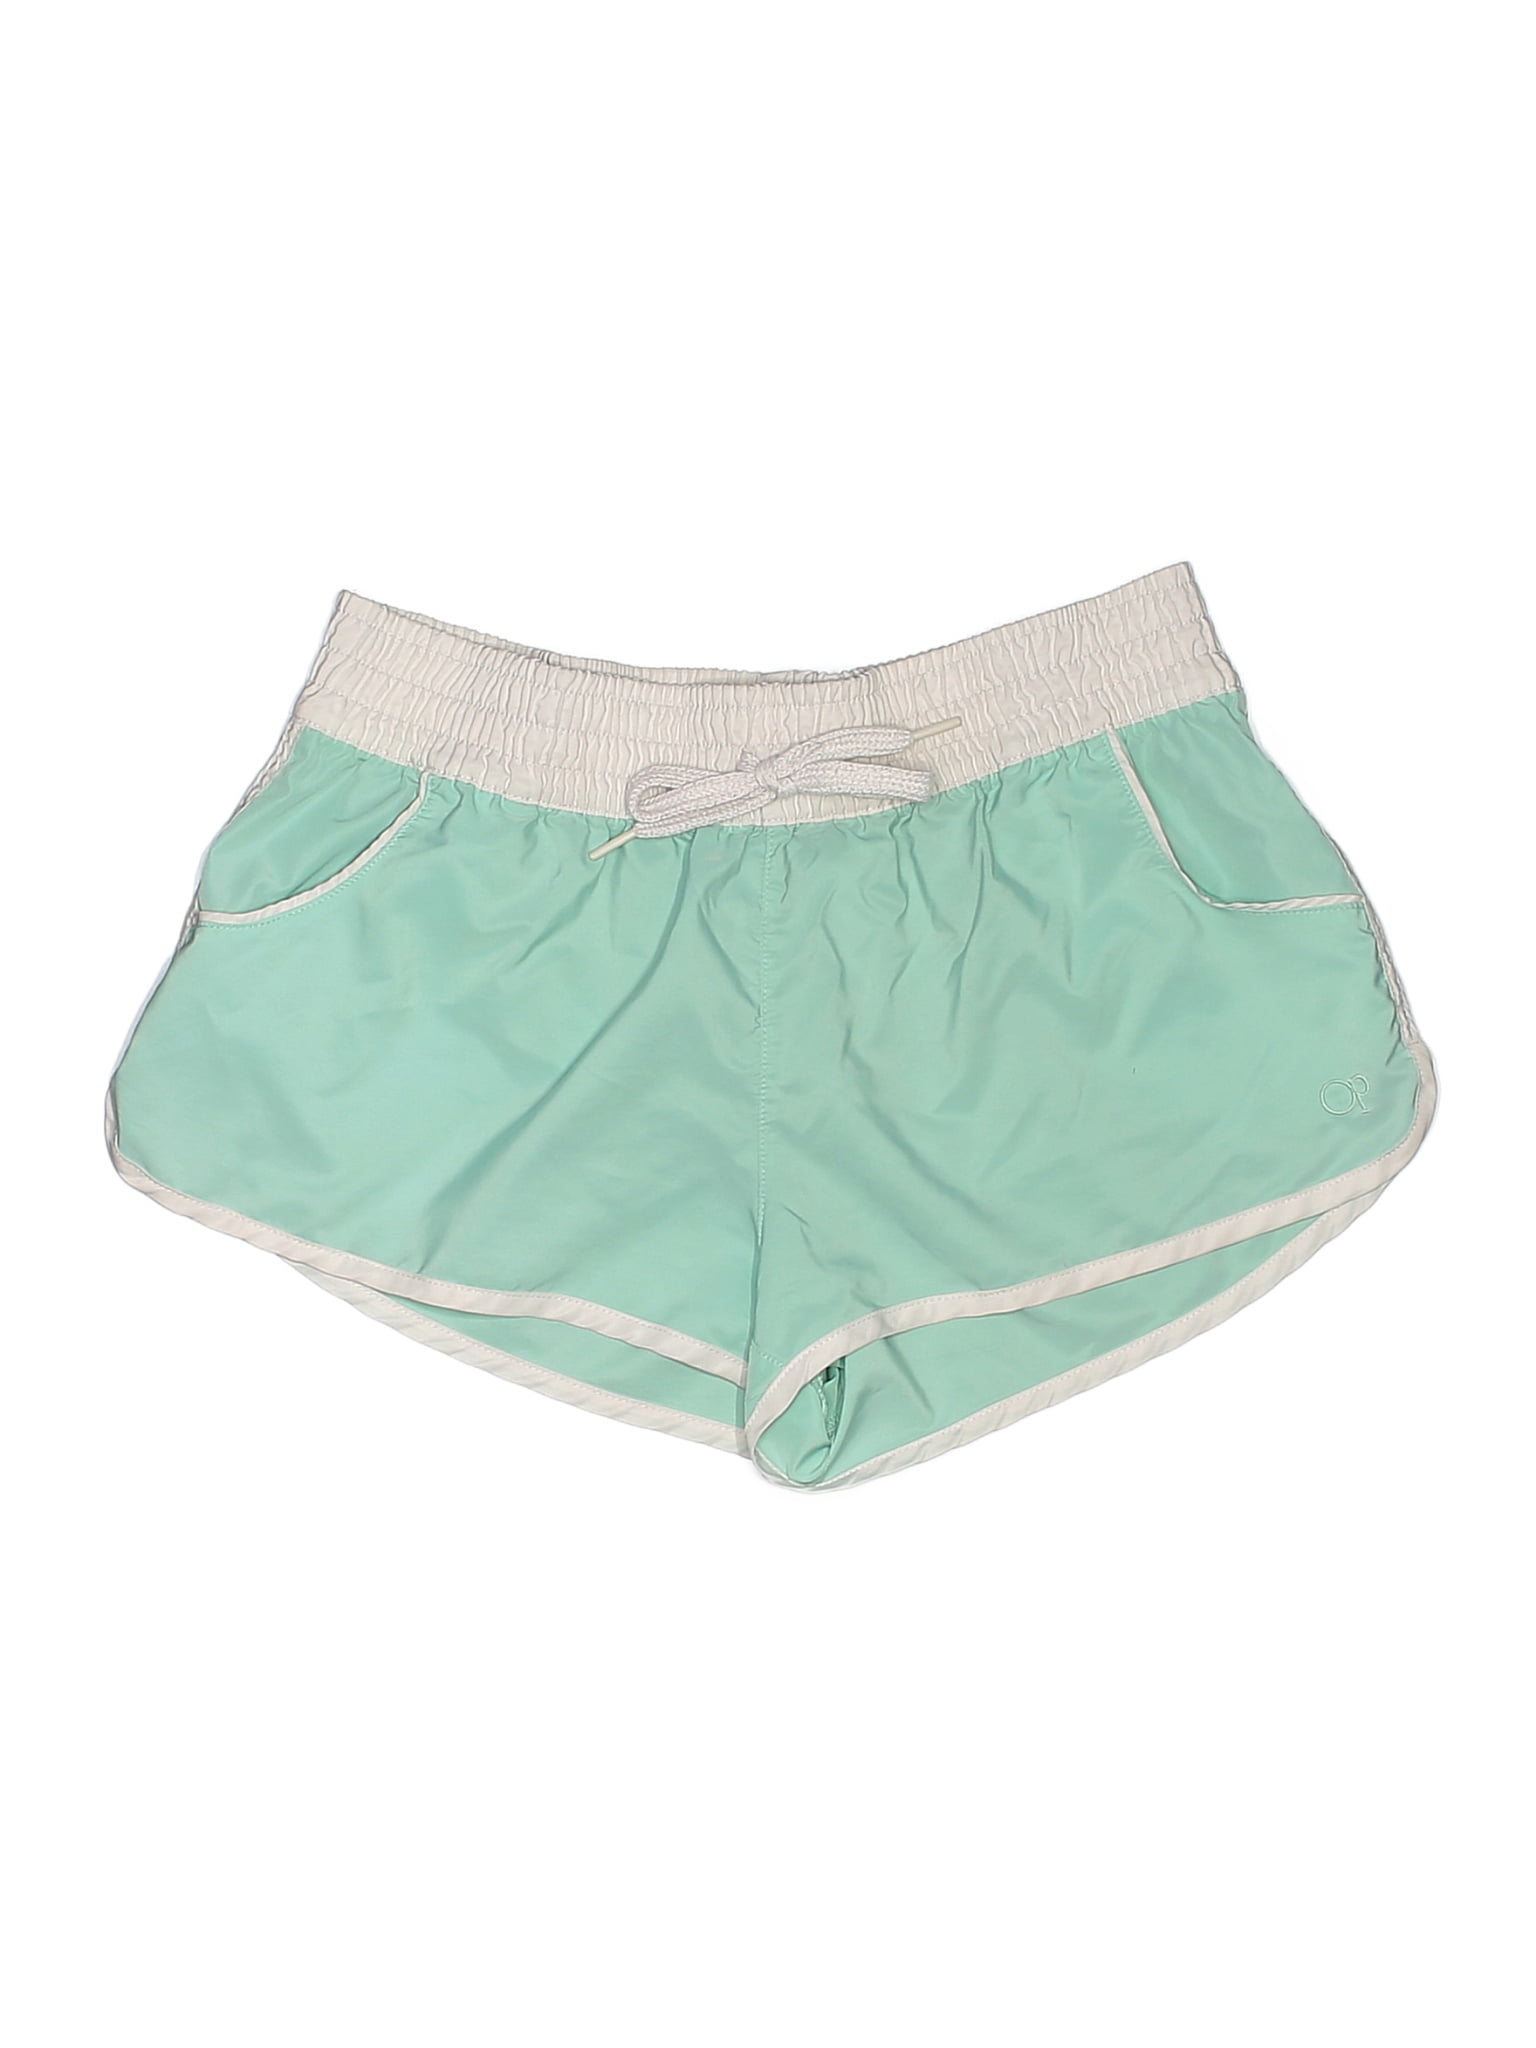 Pre-Owned Ocean Pacific Women's Size 3 Athletic Shorts - Walmart.com